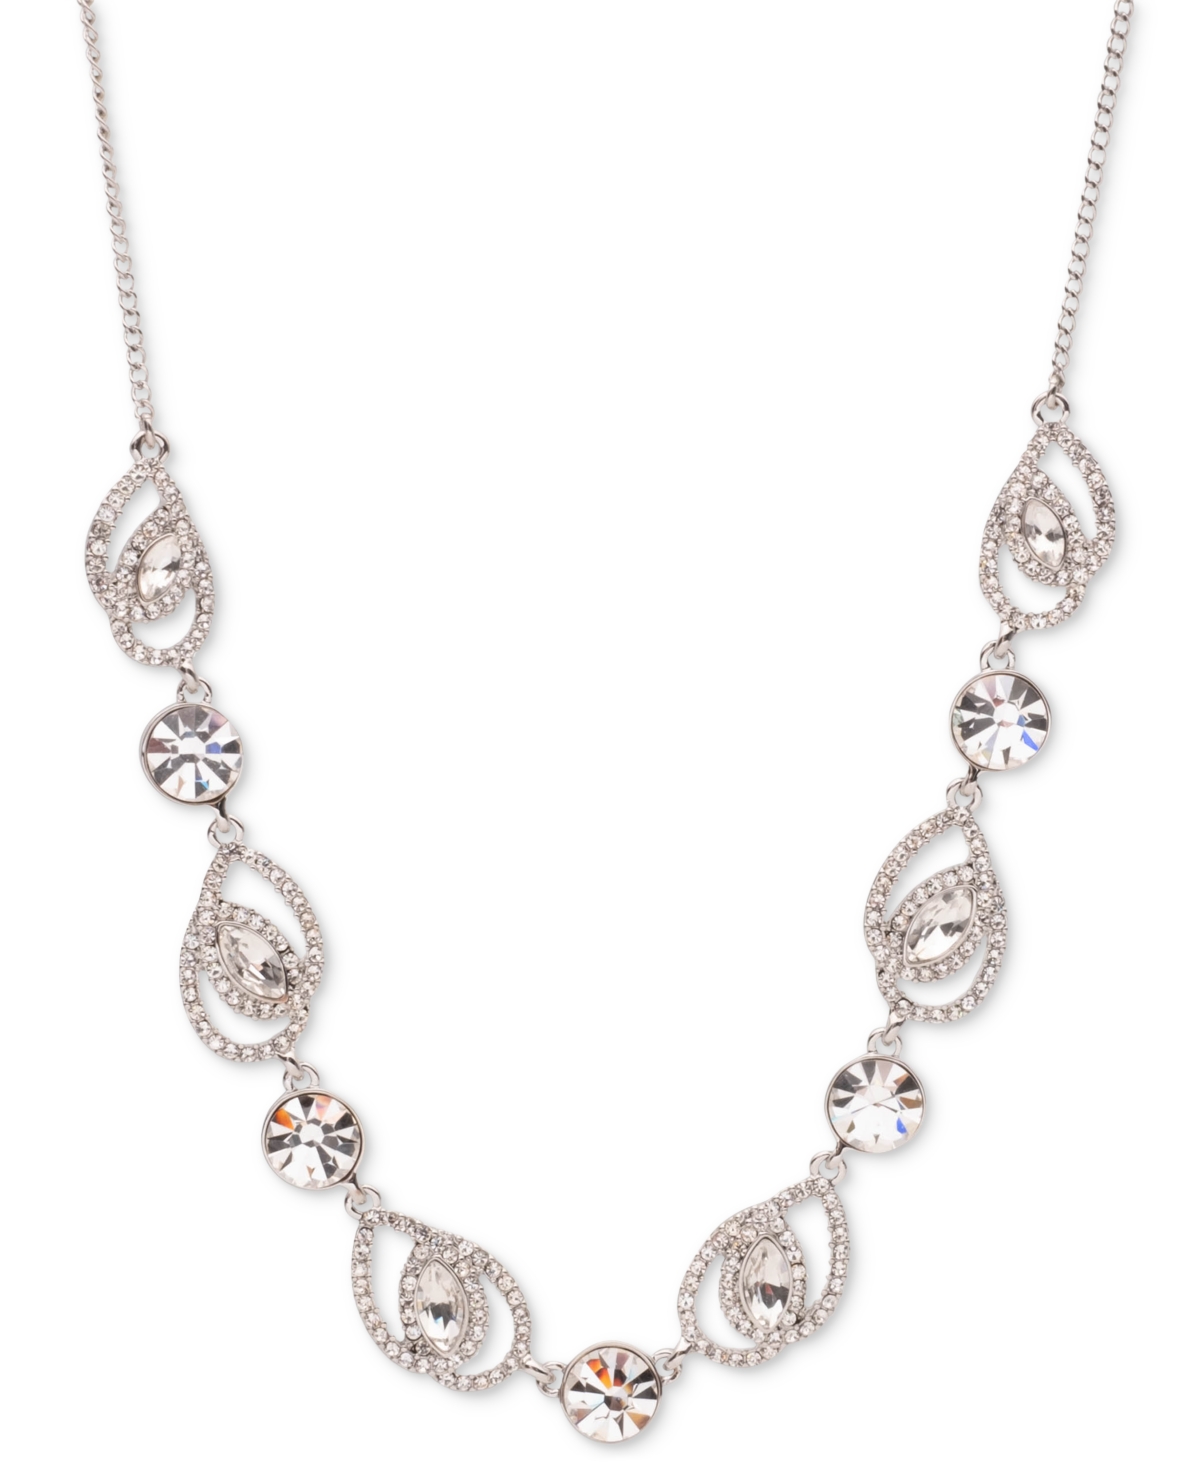 Silver-Tone Crystal Pave Pear Frontal Necklace, 16" + 3" extender - White